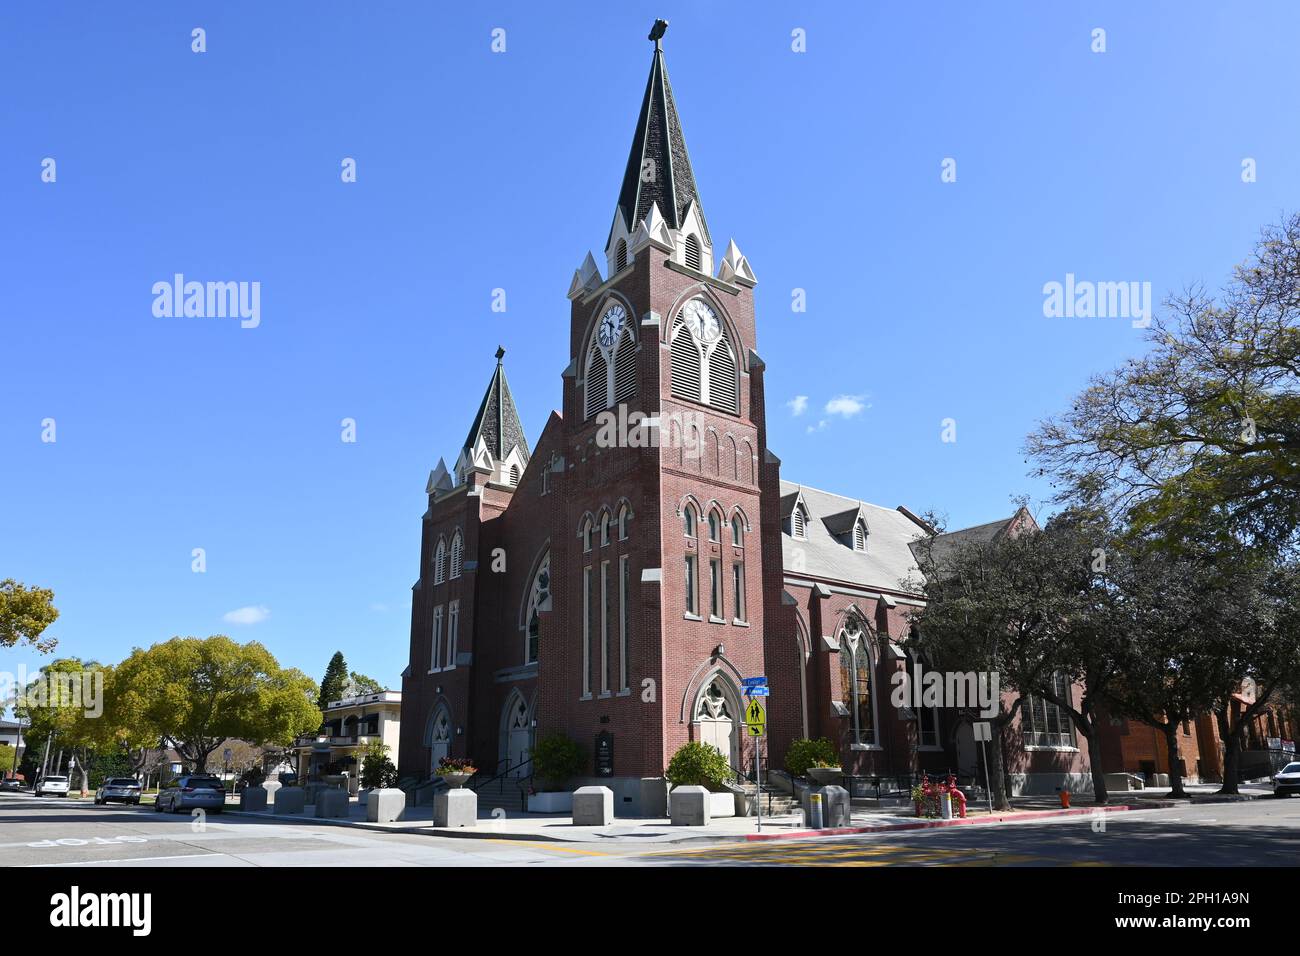 ORANGE, CALIFORNIA - 24 MAR 2023: The St. Johns Lutheran Church, founded in 1882, built in 1913-14, is located in Old Towne. Stock Photo